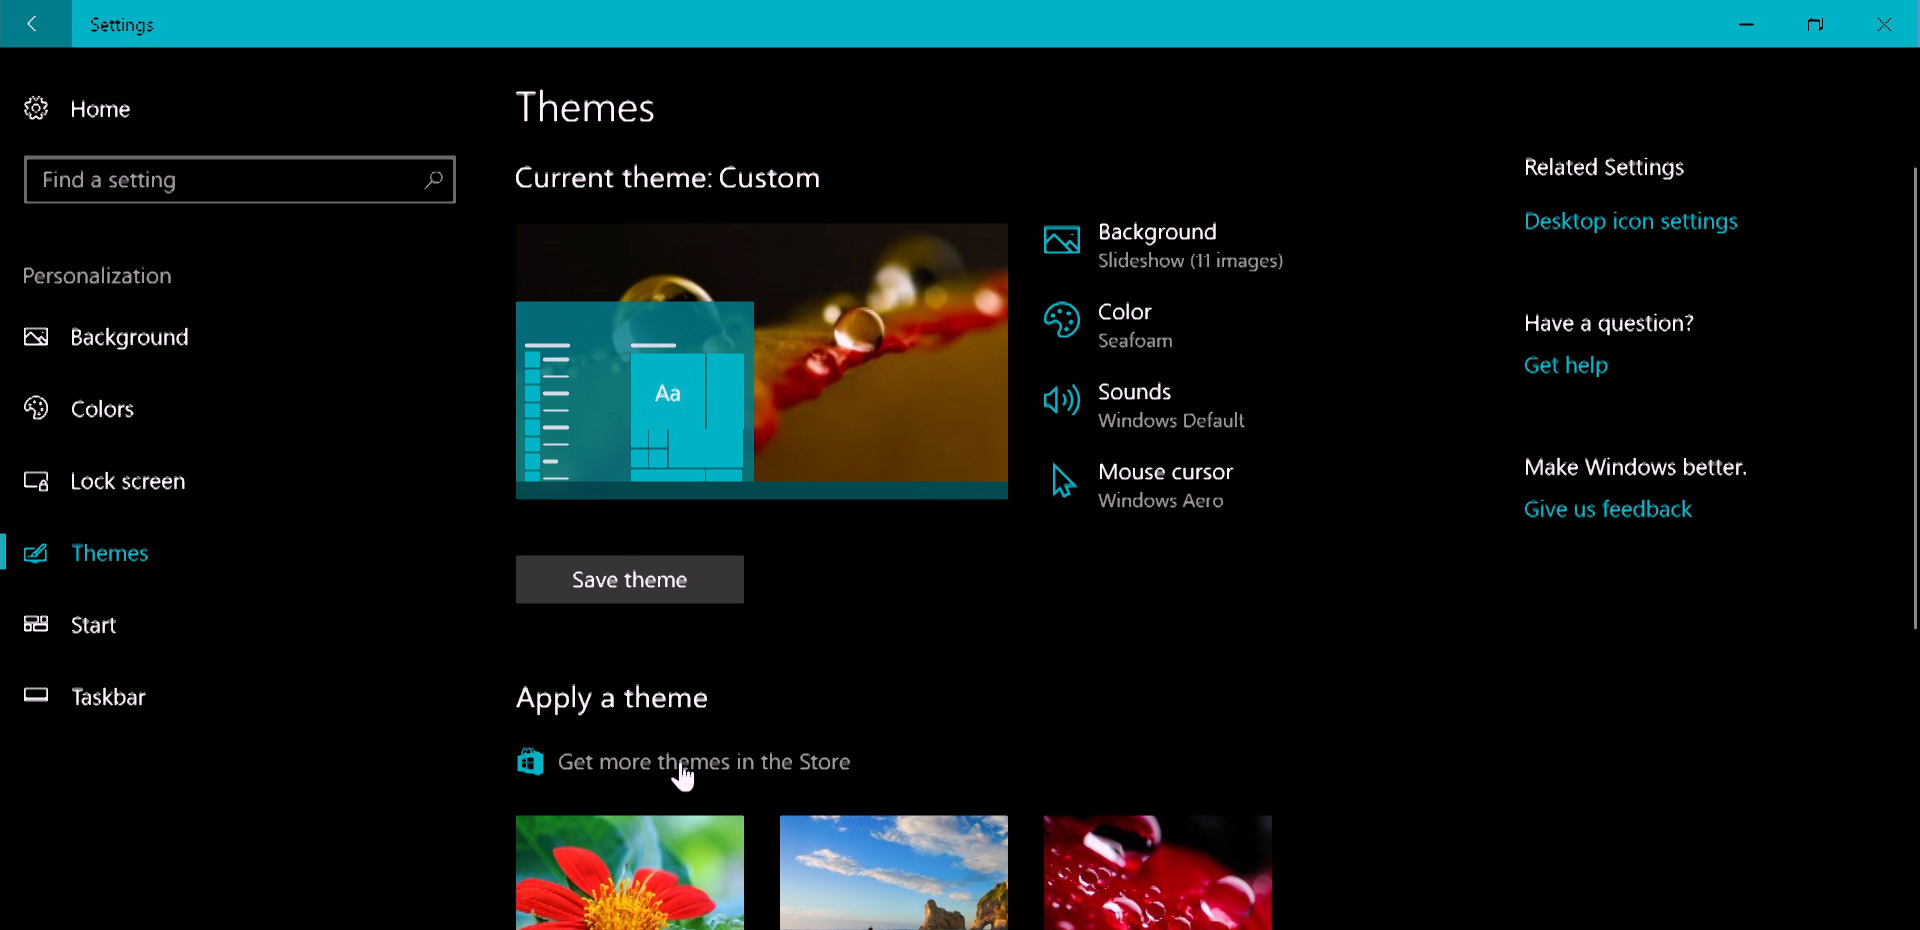 Personalize your PC with new themes in the Windows Store